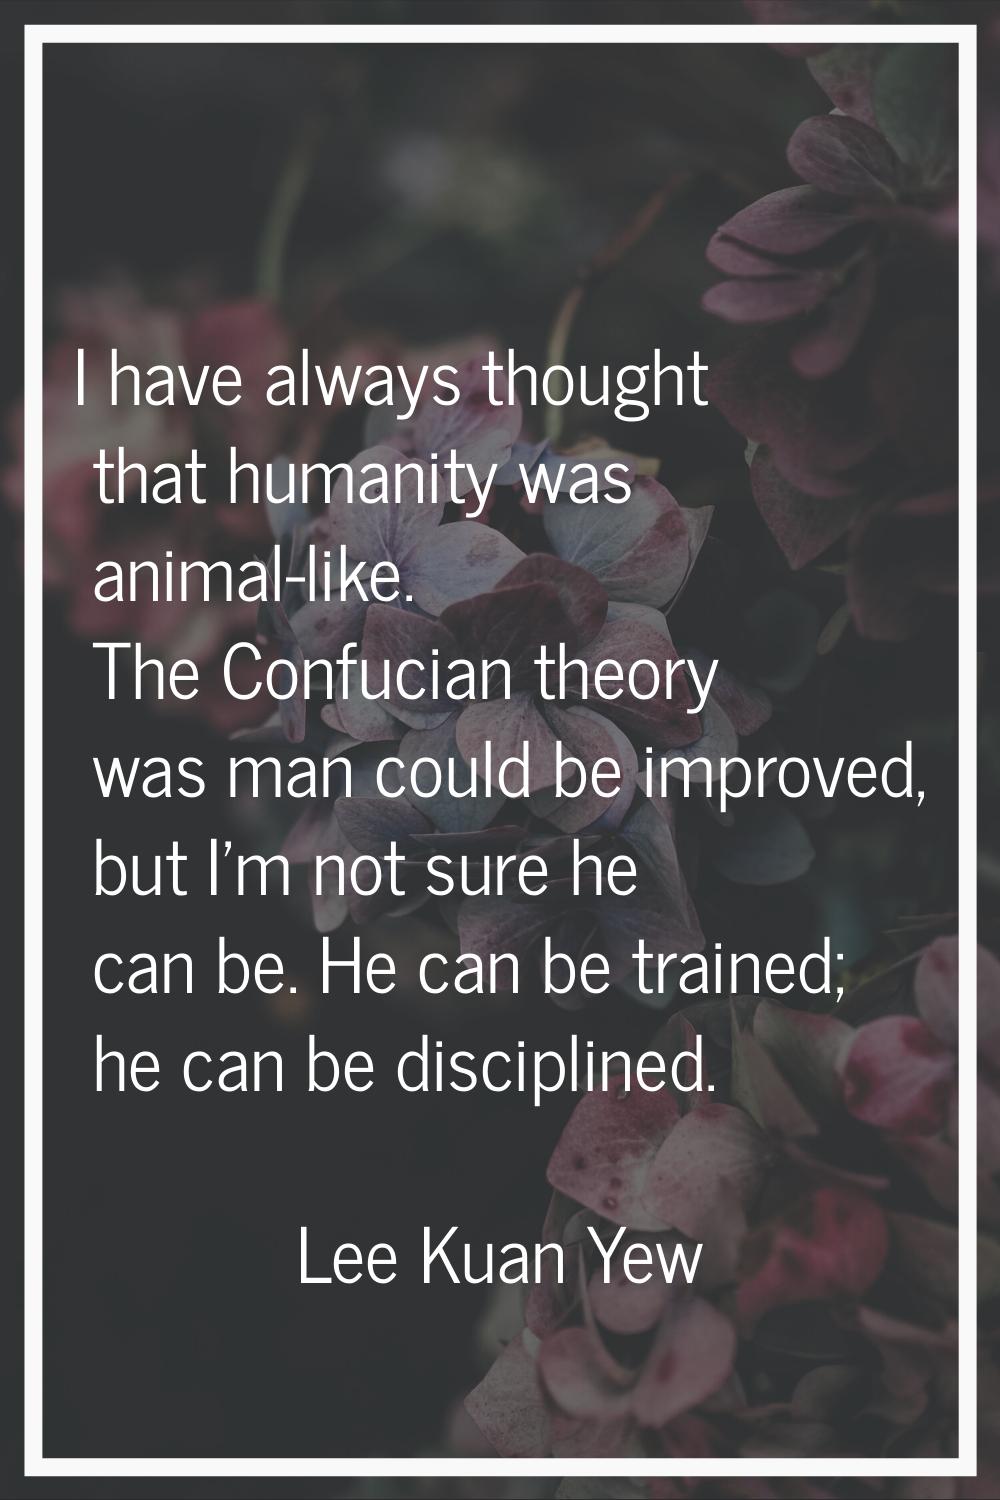 I have always thought that humanity was animal-like. The Confucian theory was man could be improved